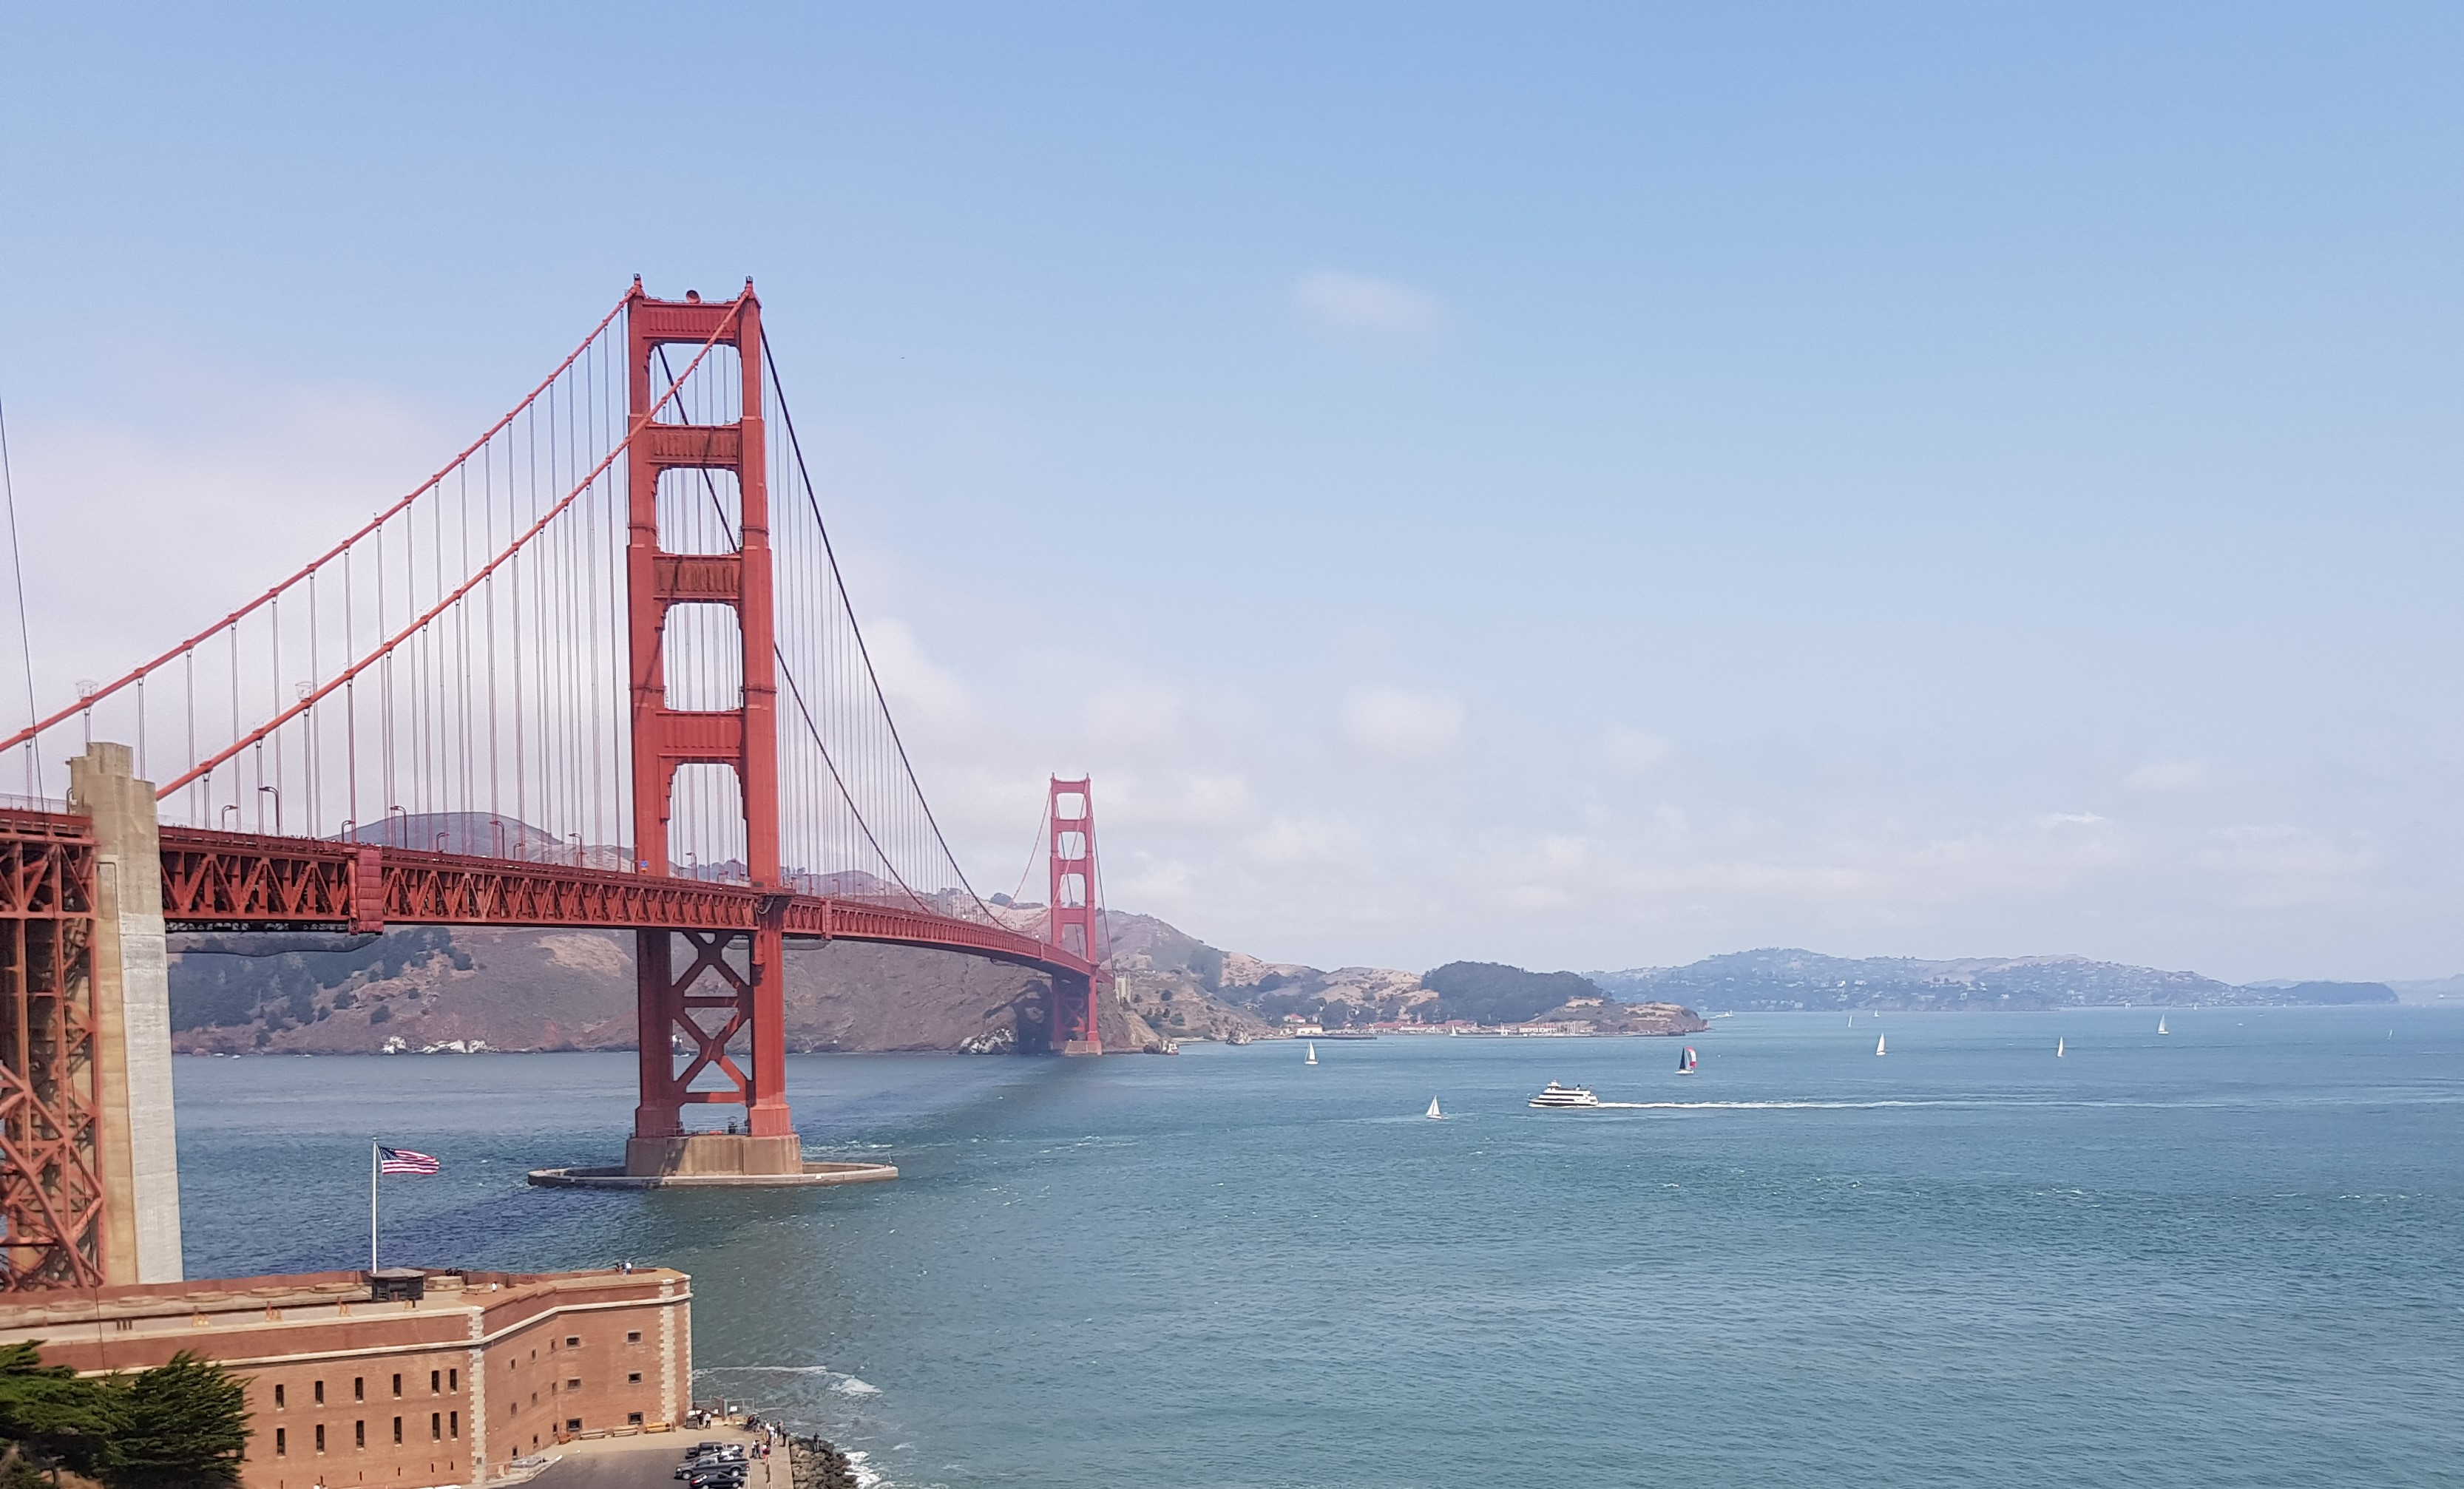 A view of the bright red golden gate bridge in San Francisco on a sunny day.